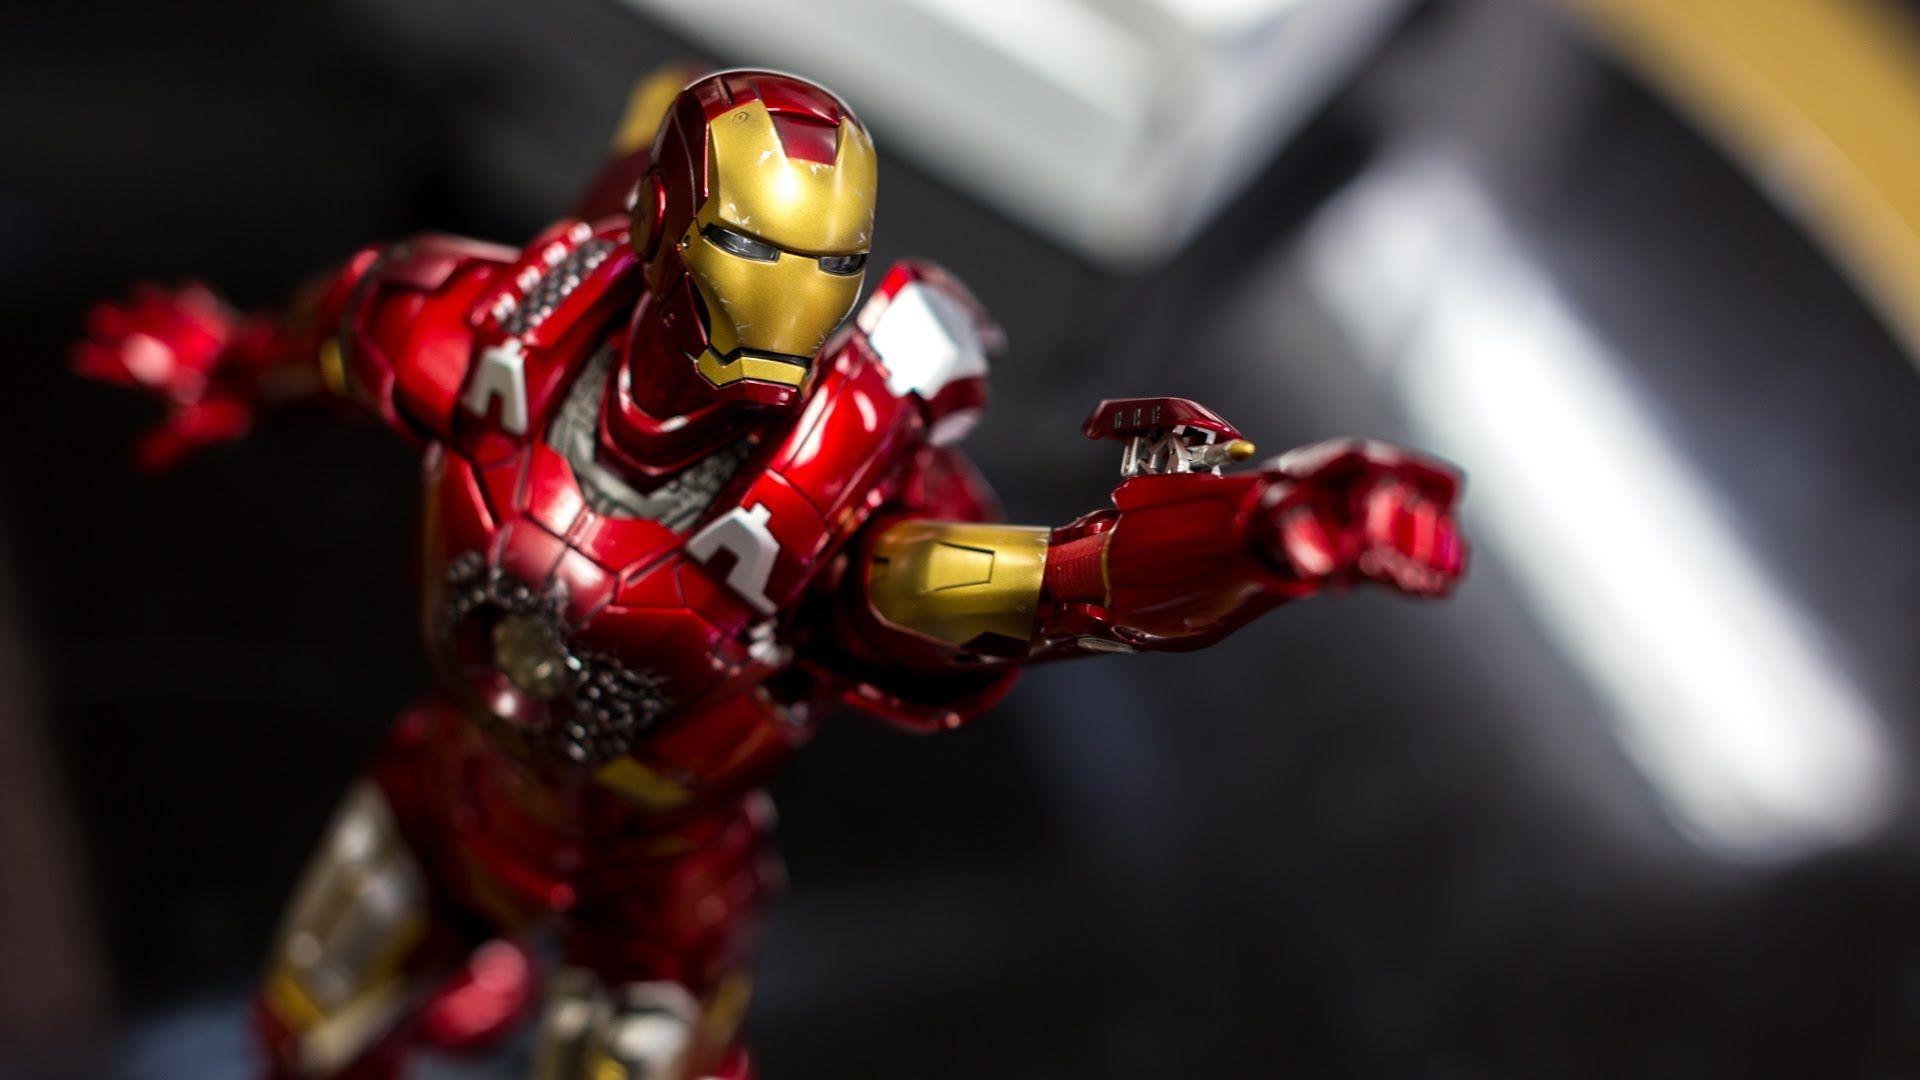 Show And Tell: Hot Toys Iron Man Mark VII 1 6 Scale Figure